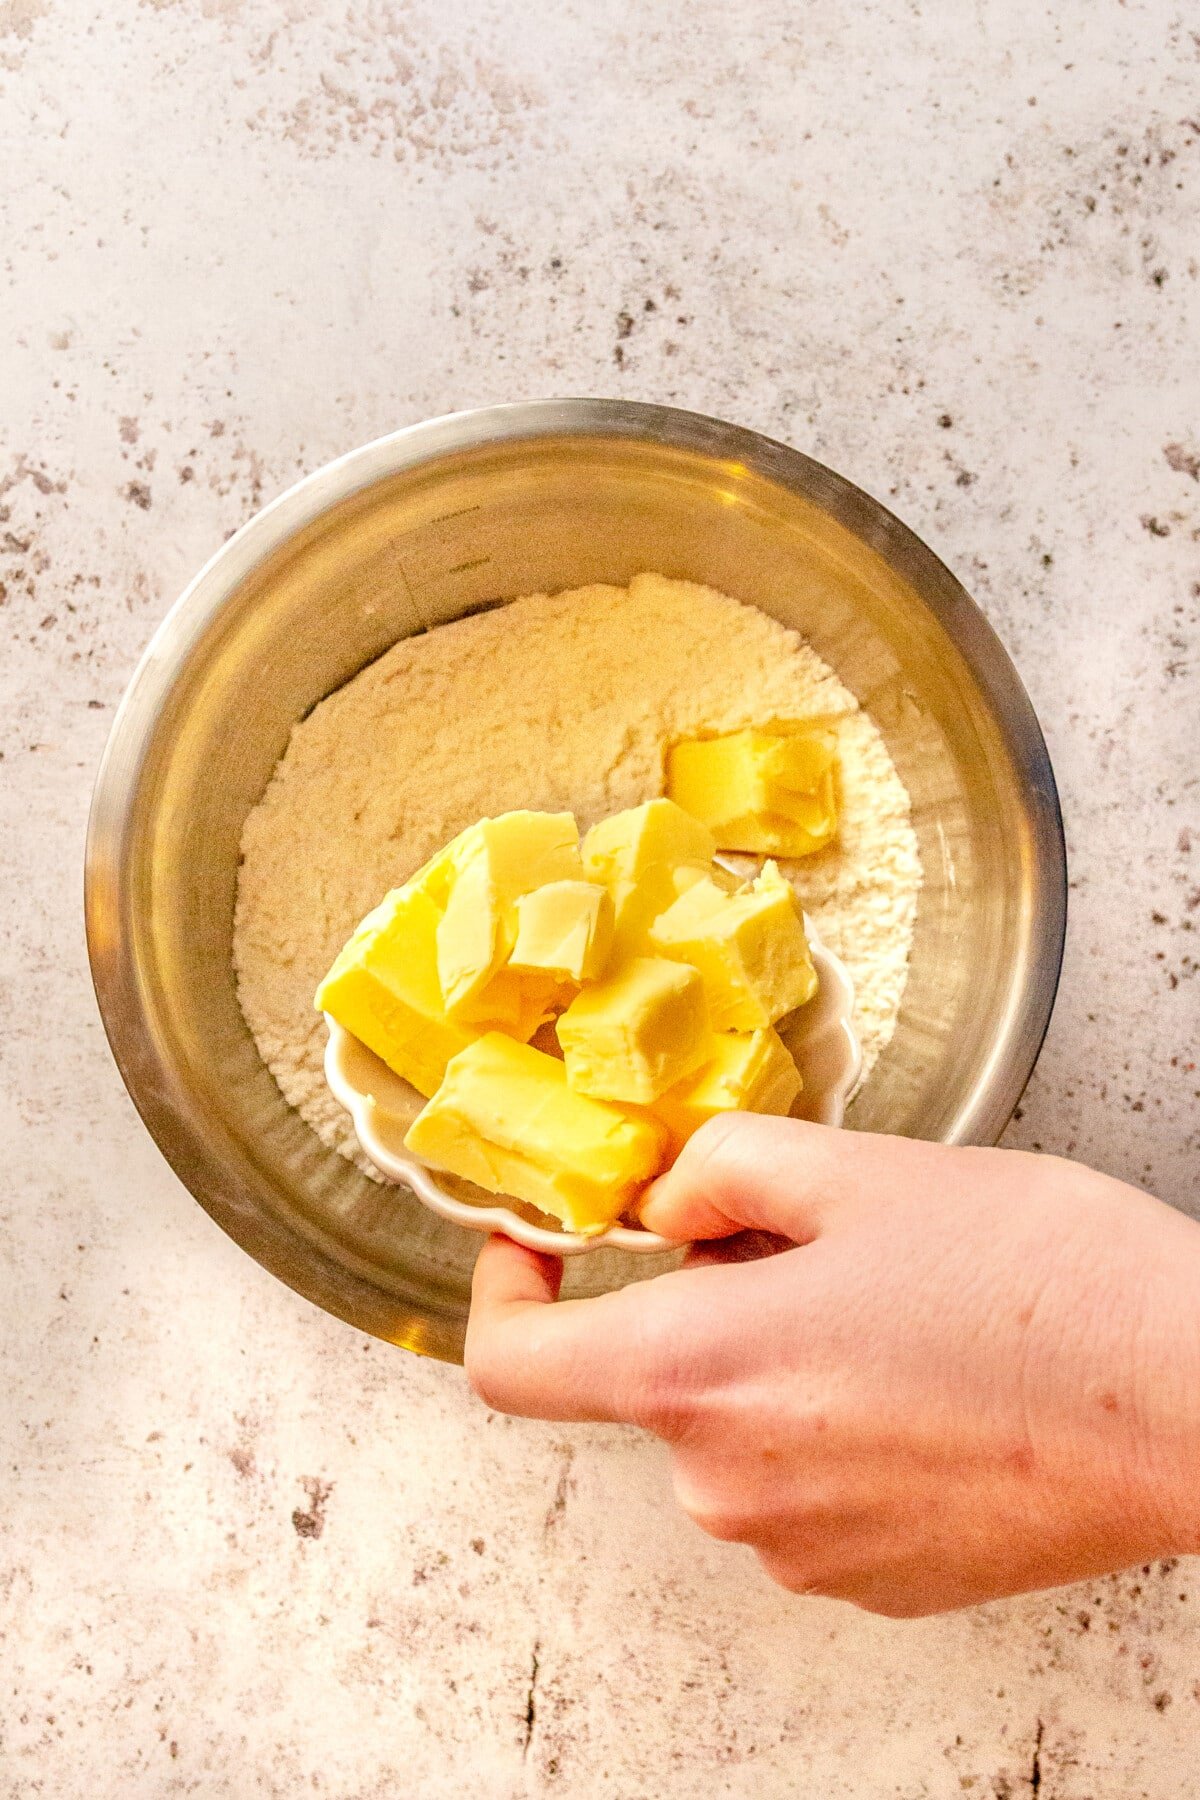 Cubes of butter are shown being added to a metal mixing bowl of flour.